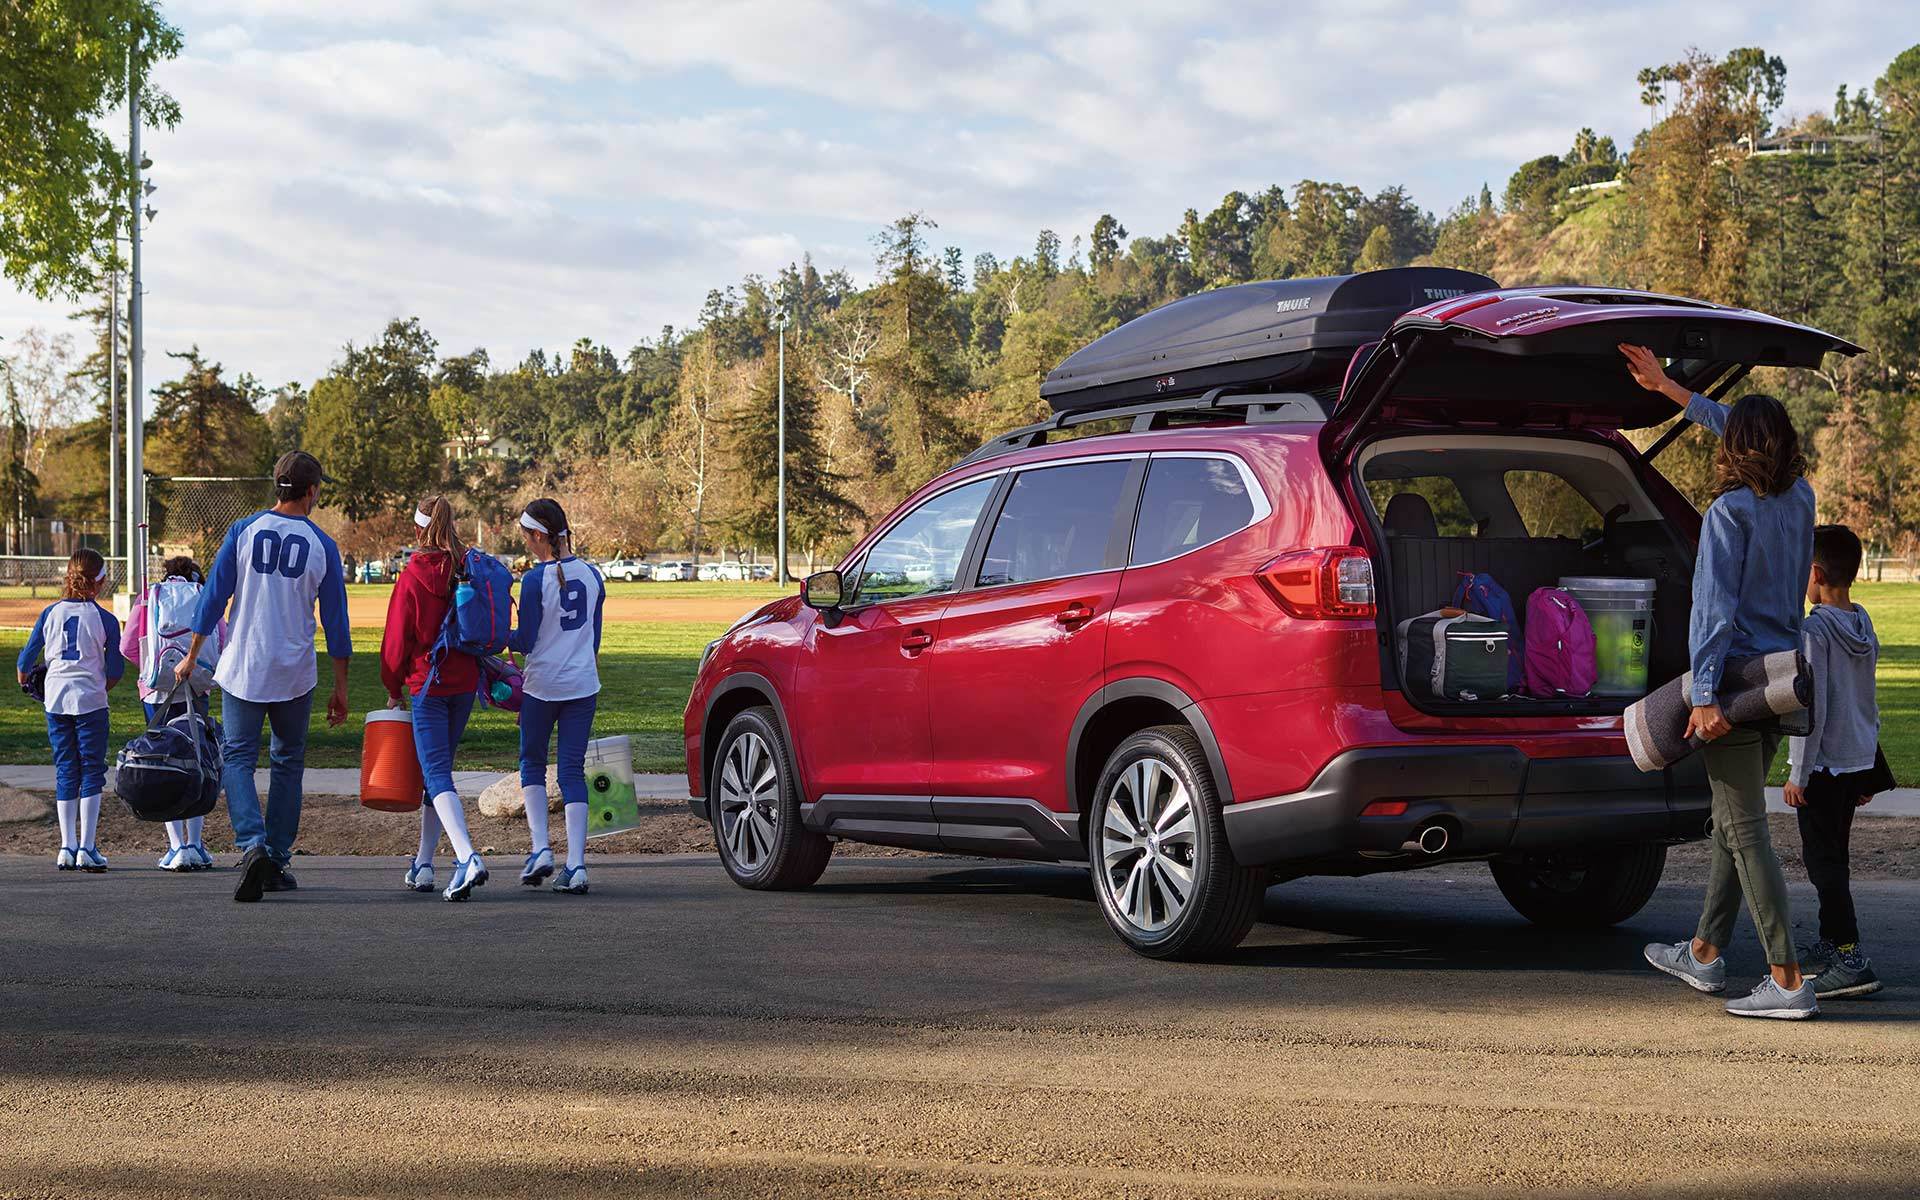 3 New Standard Safety Features Added to the 2021 Subaru Ascent